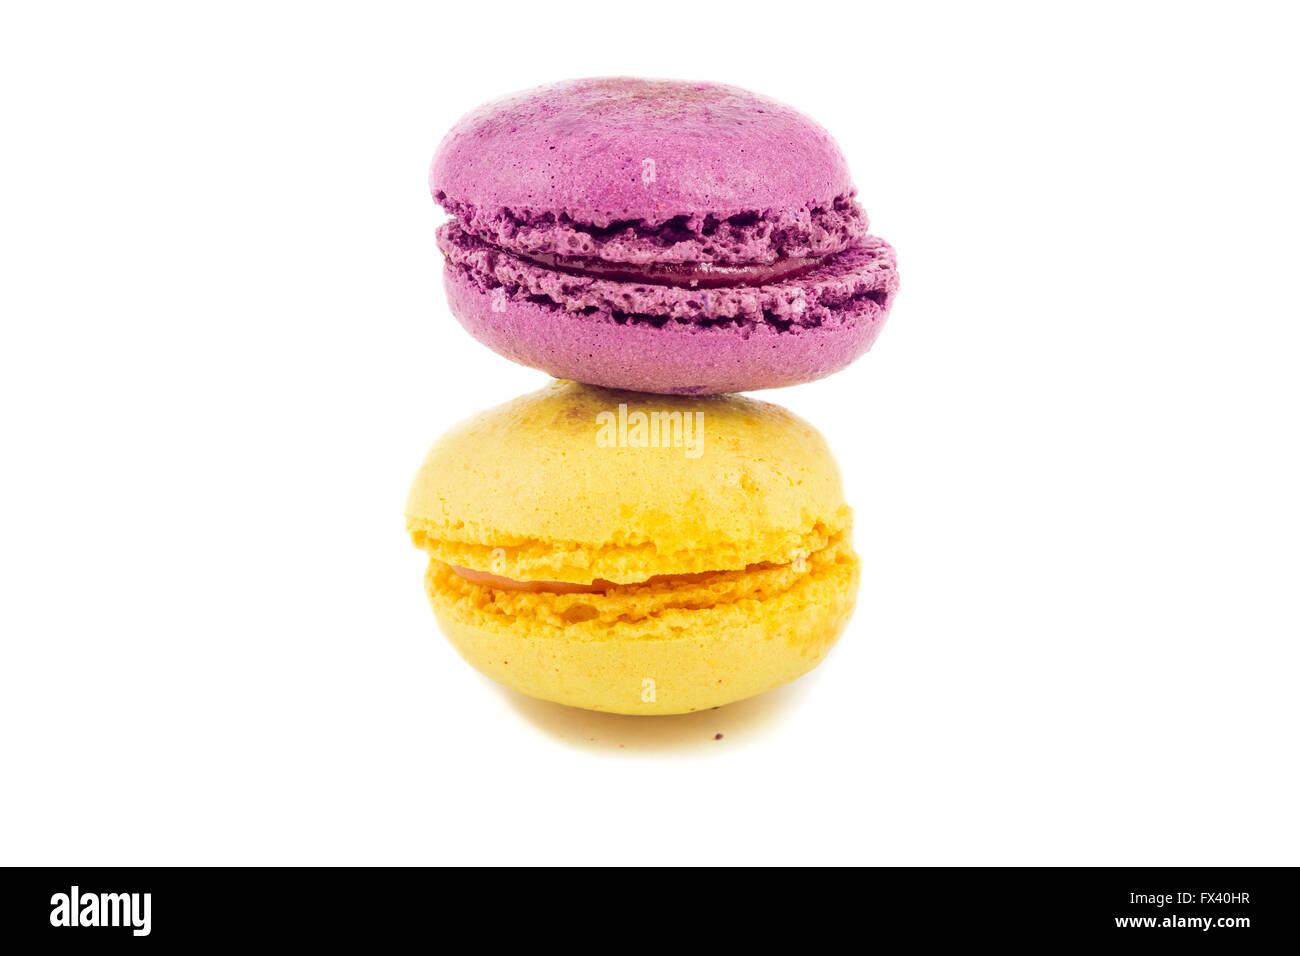 Delicious colorful fresh macaroons on white background Stock Photo